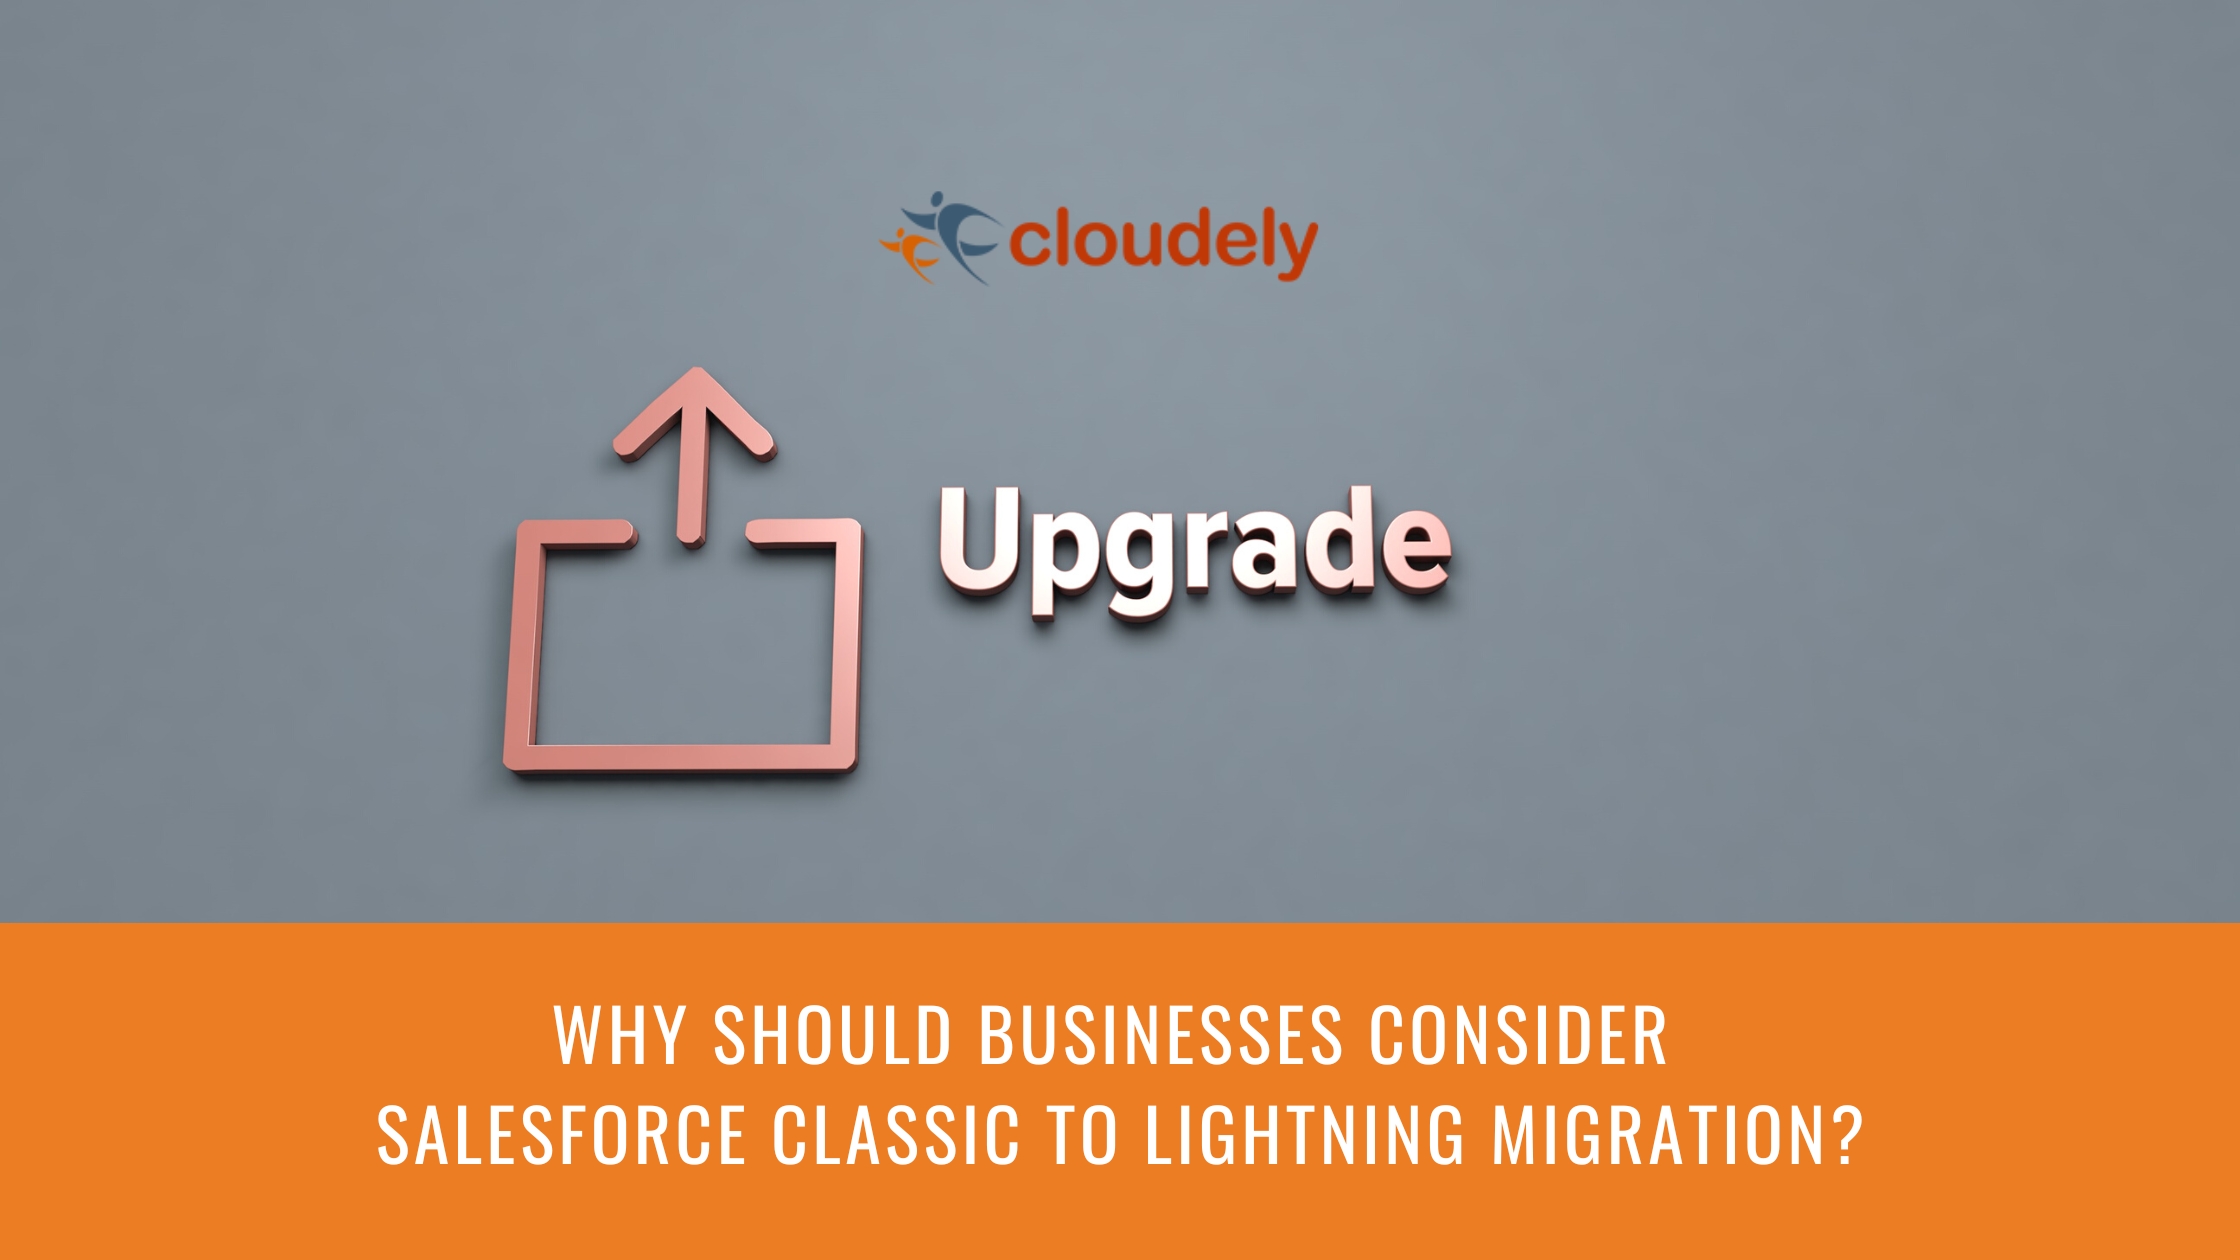 Salesforce Classic to Lightning Migration